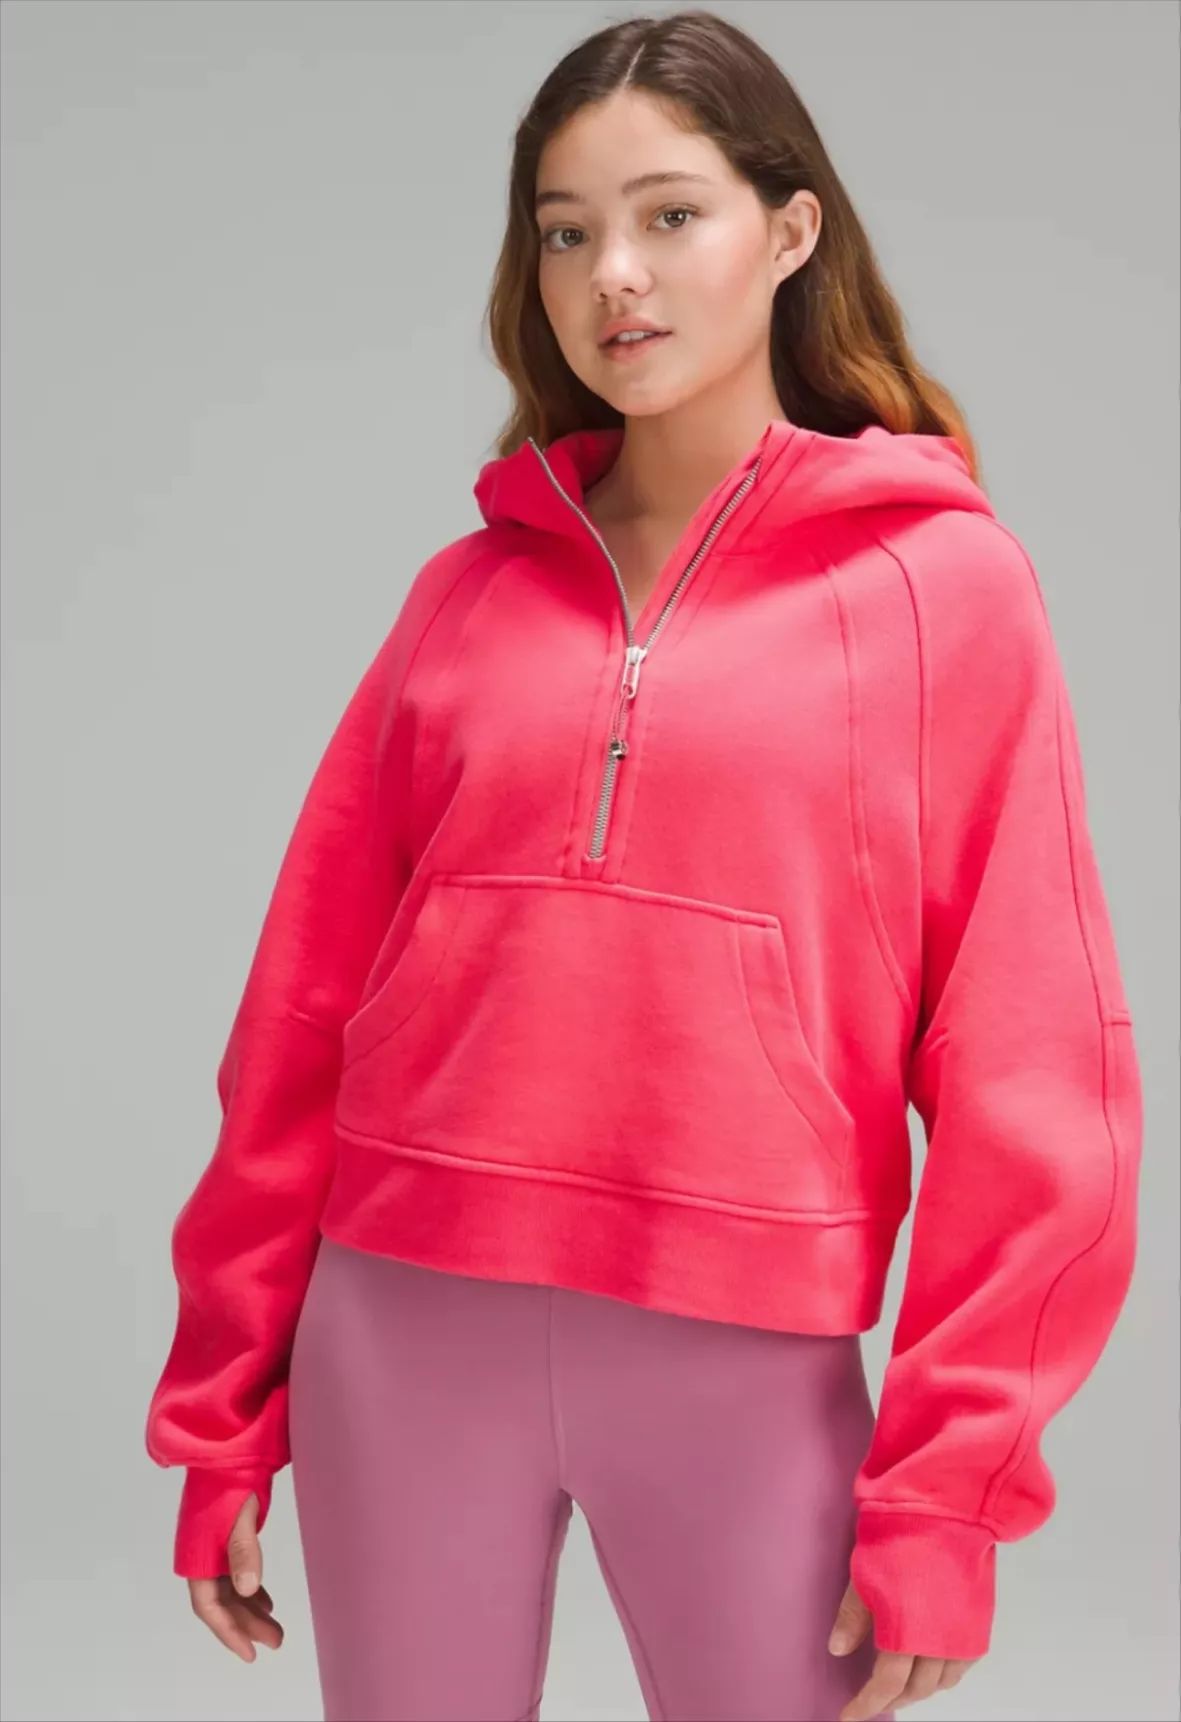 Scuba Oversized Full-Zip Hoodie curated on LTK